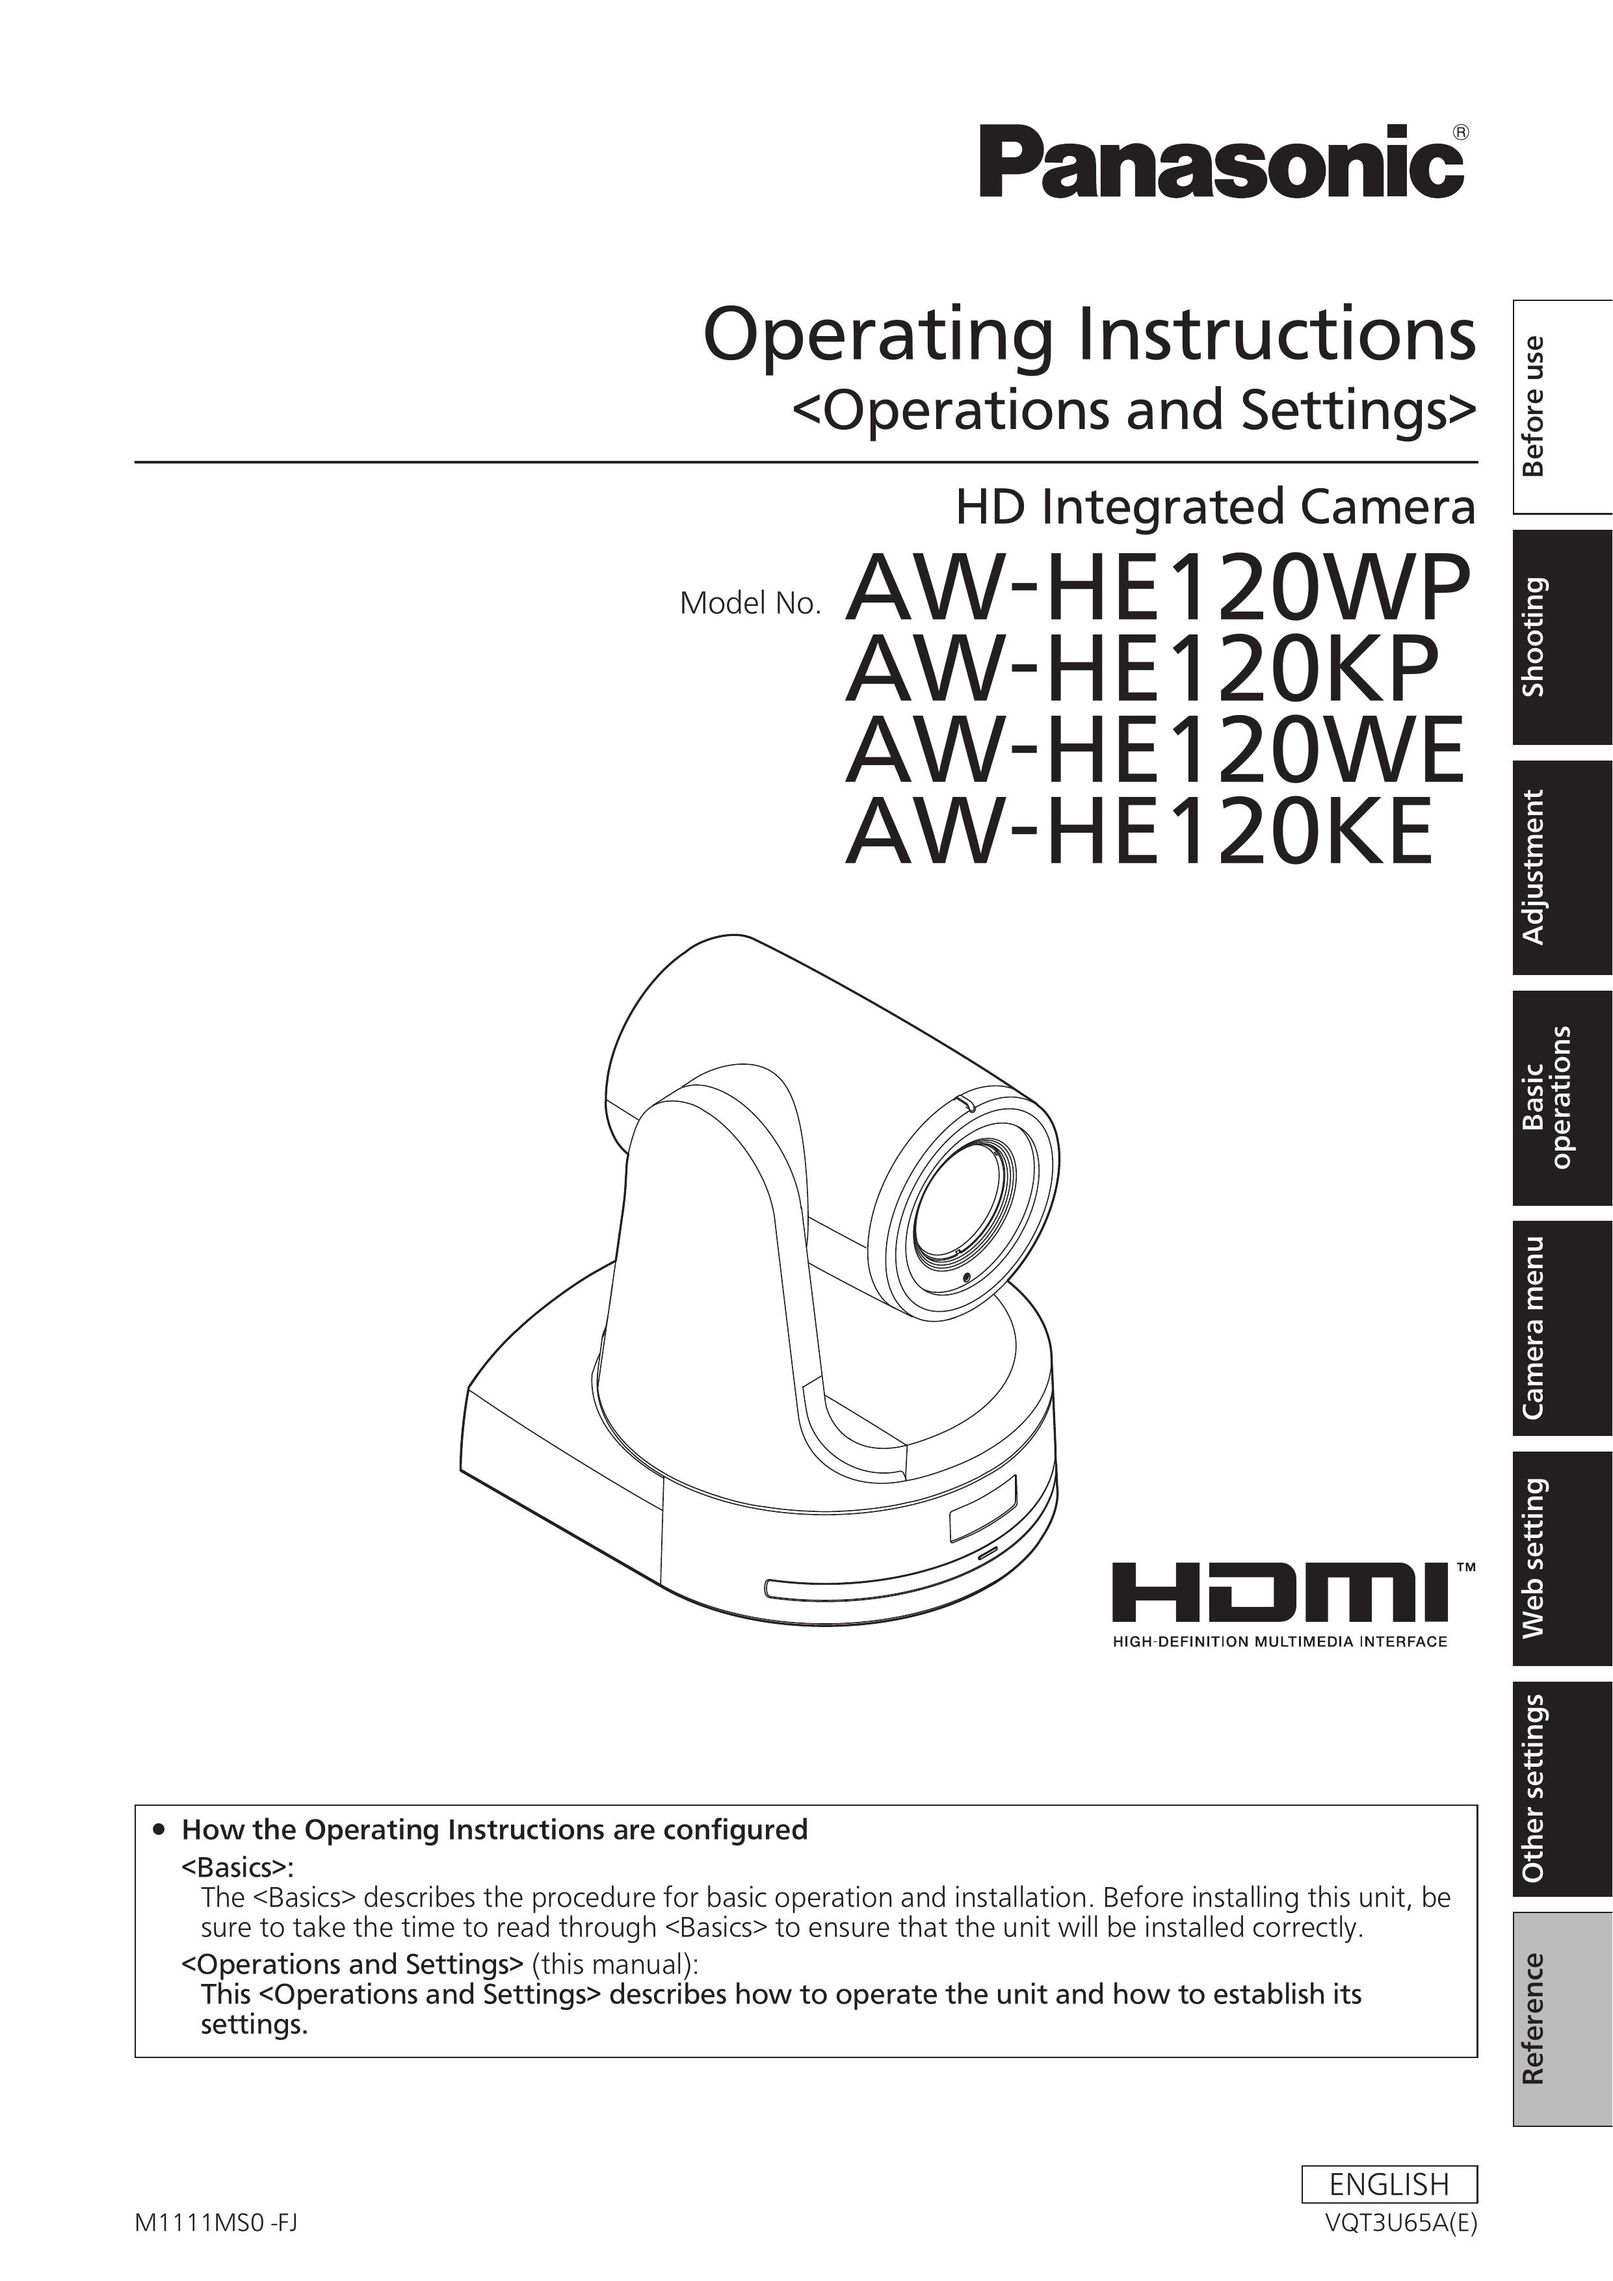 Panasonic AW-HE120WE Home Security System User Manual